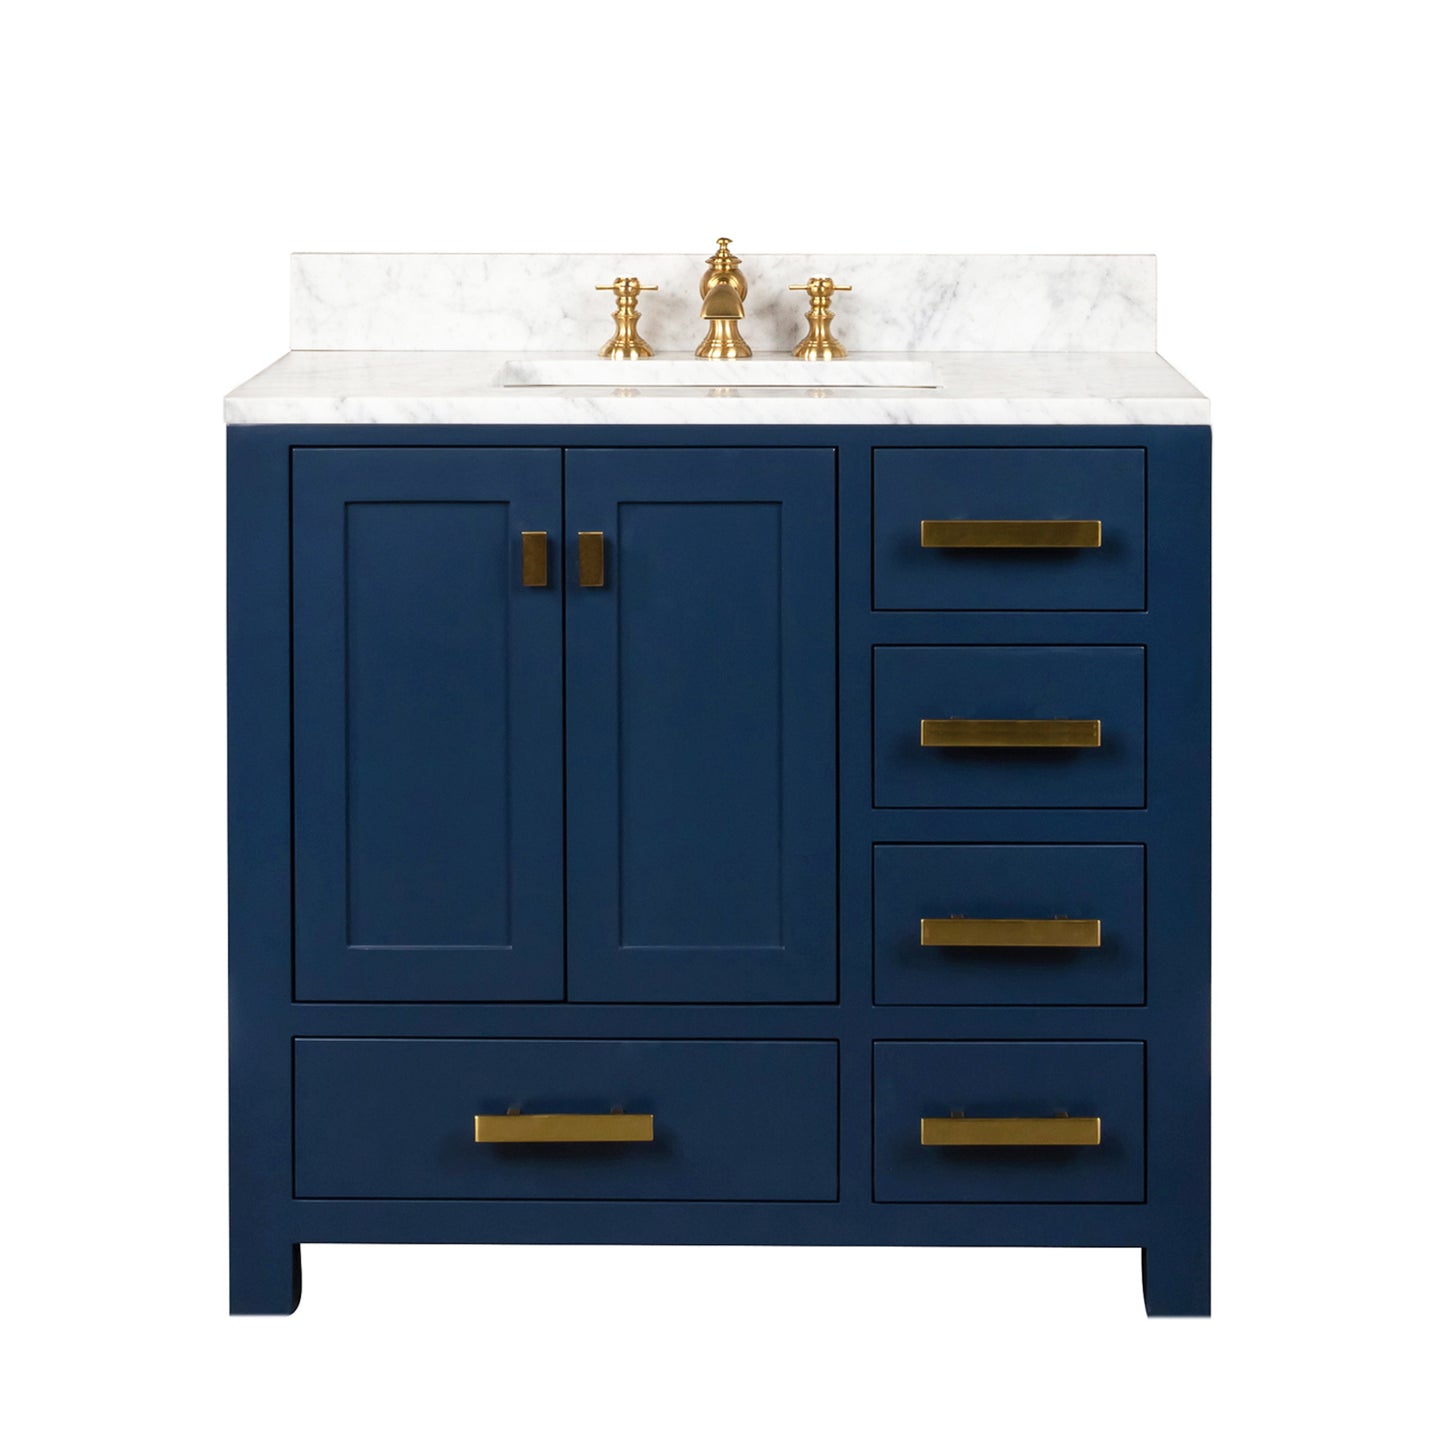 Water Creation Madison 36" Inch Single Sink Carrara White Marble Vanity In Monarch Blue with Lavatory Faucet - Luxe Bathroom Vanities